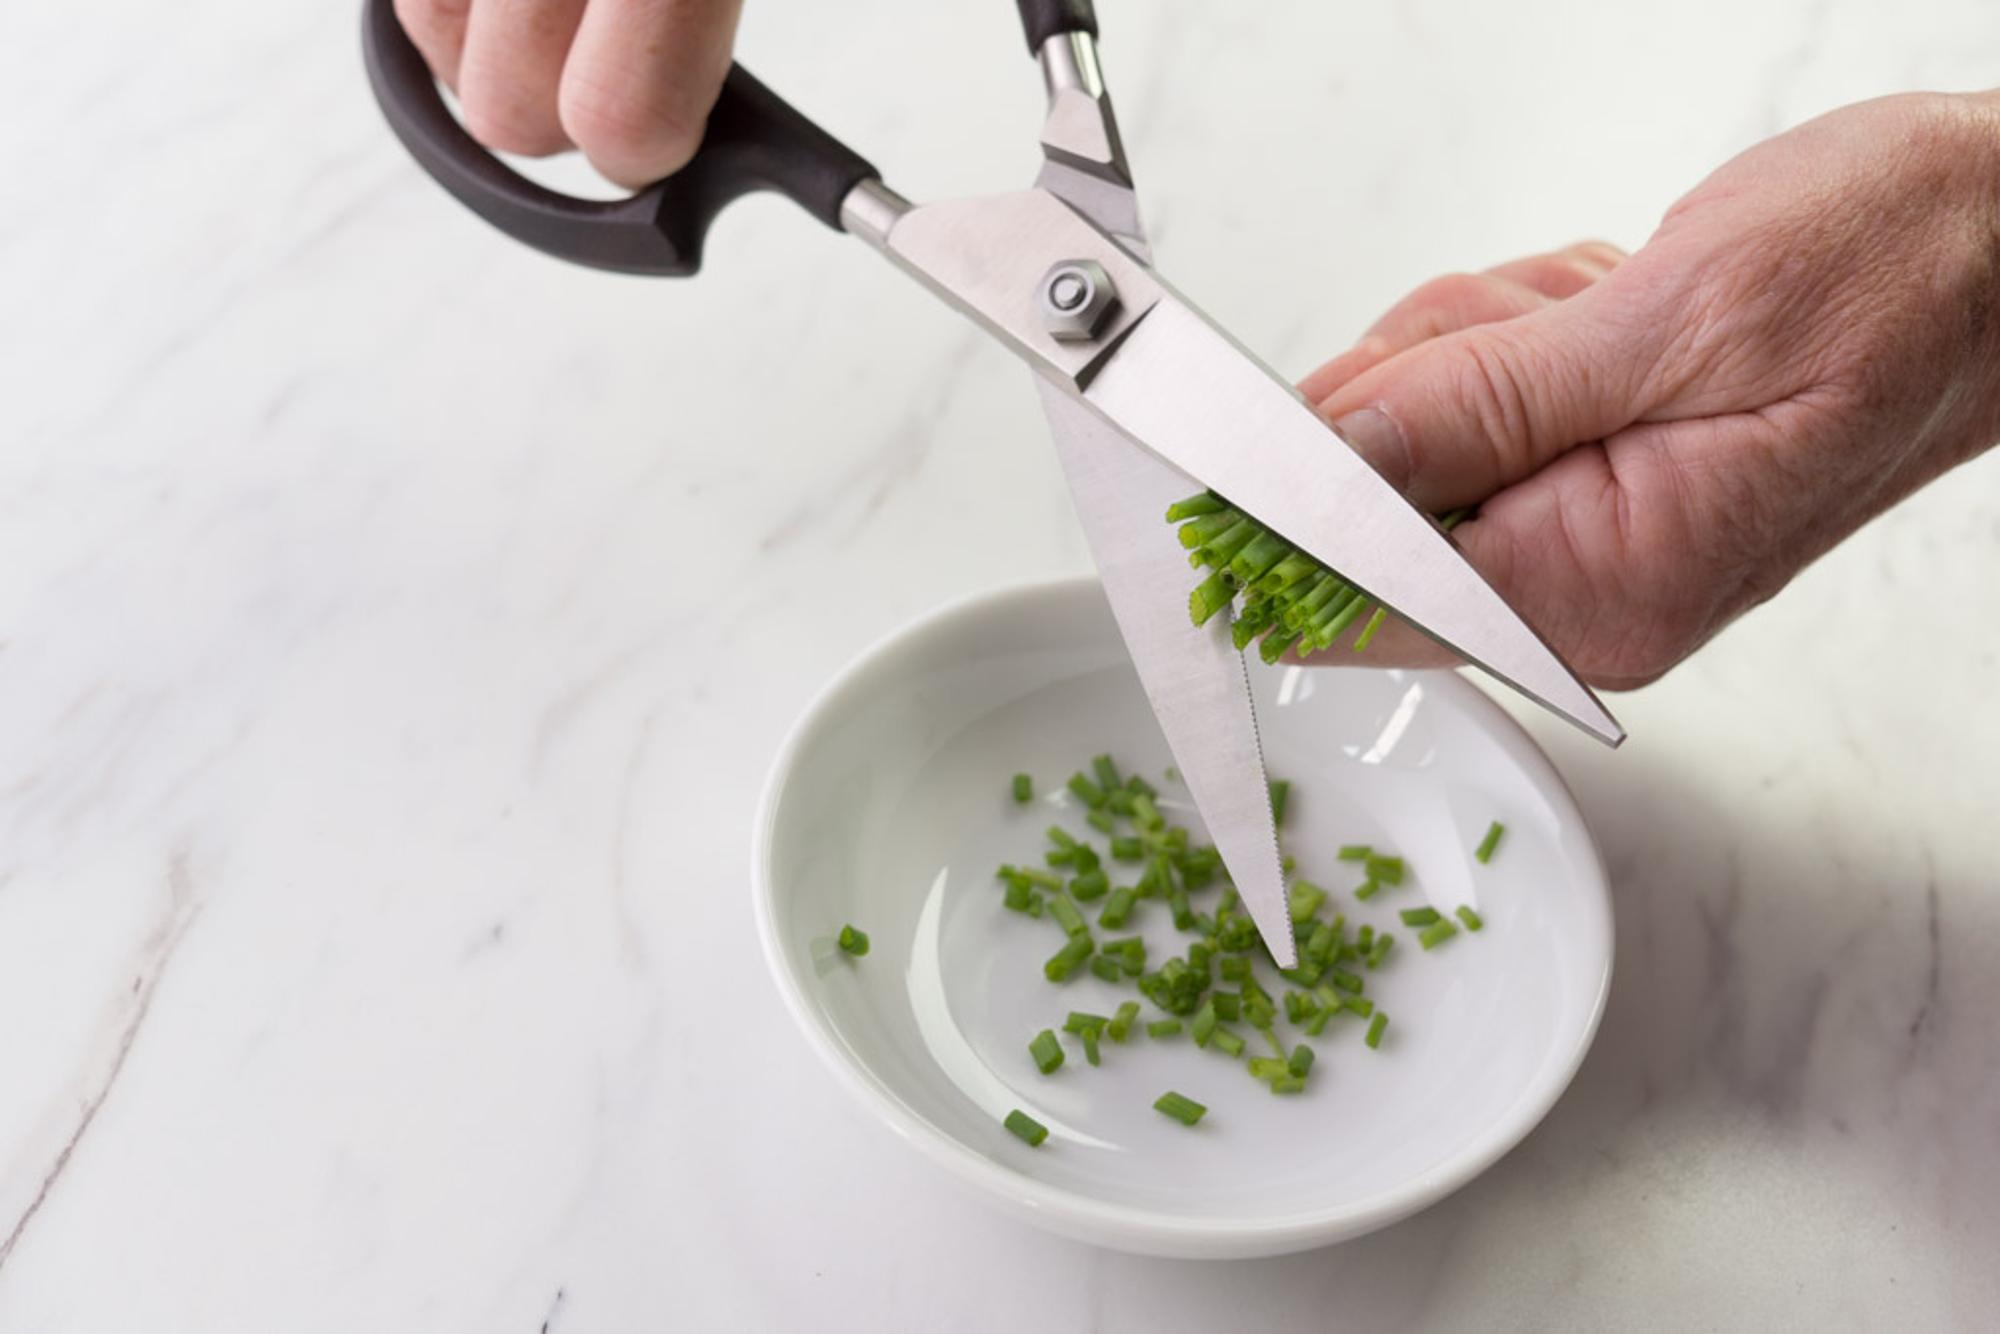 Snipping the chives with the Super Shears.